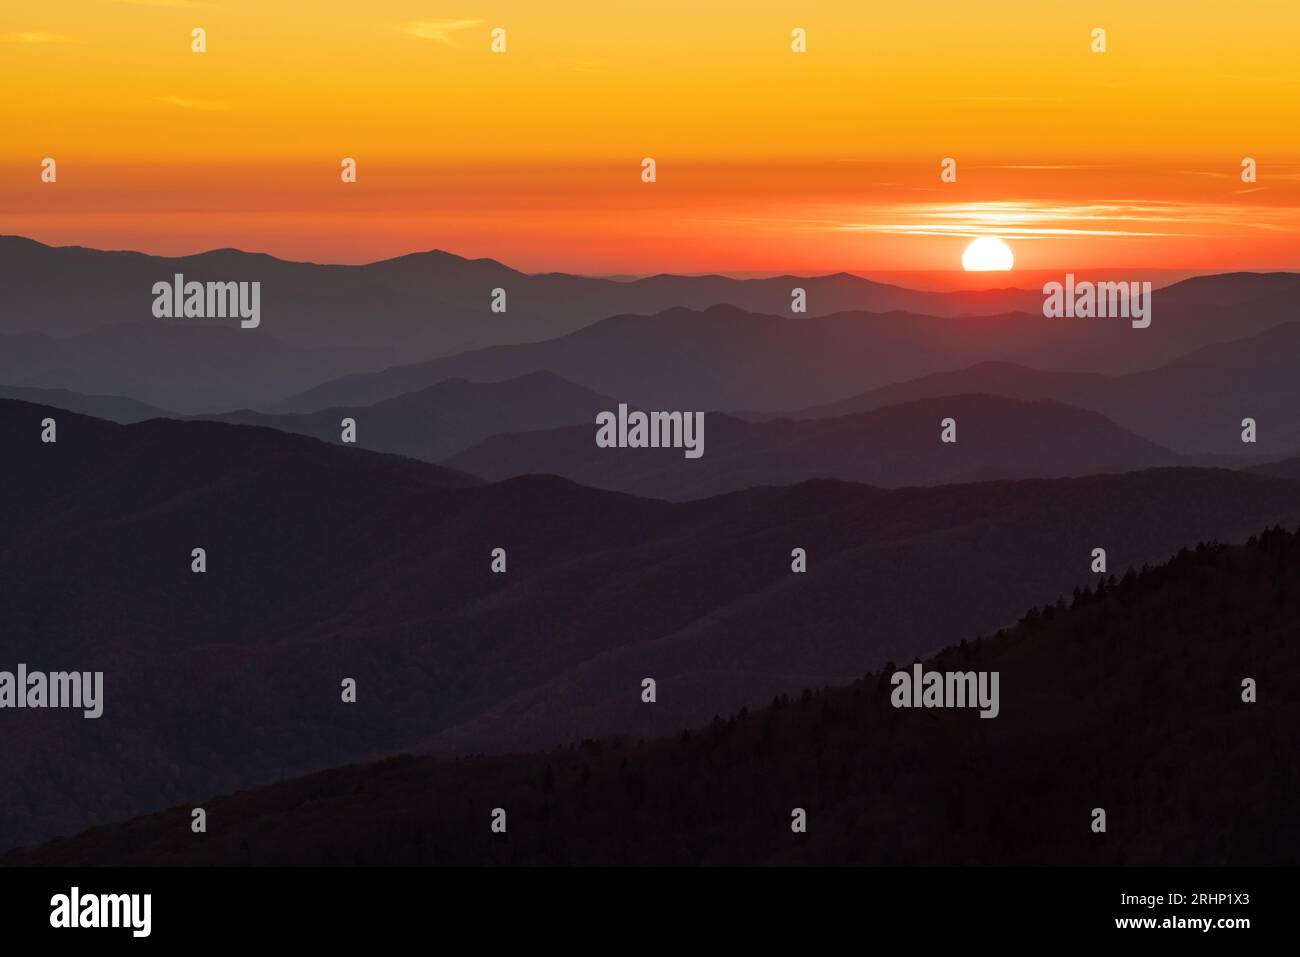 The sun sets over the Appalachian mountains in Great Smoky Mountains National Park. Stock Photo